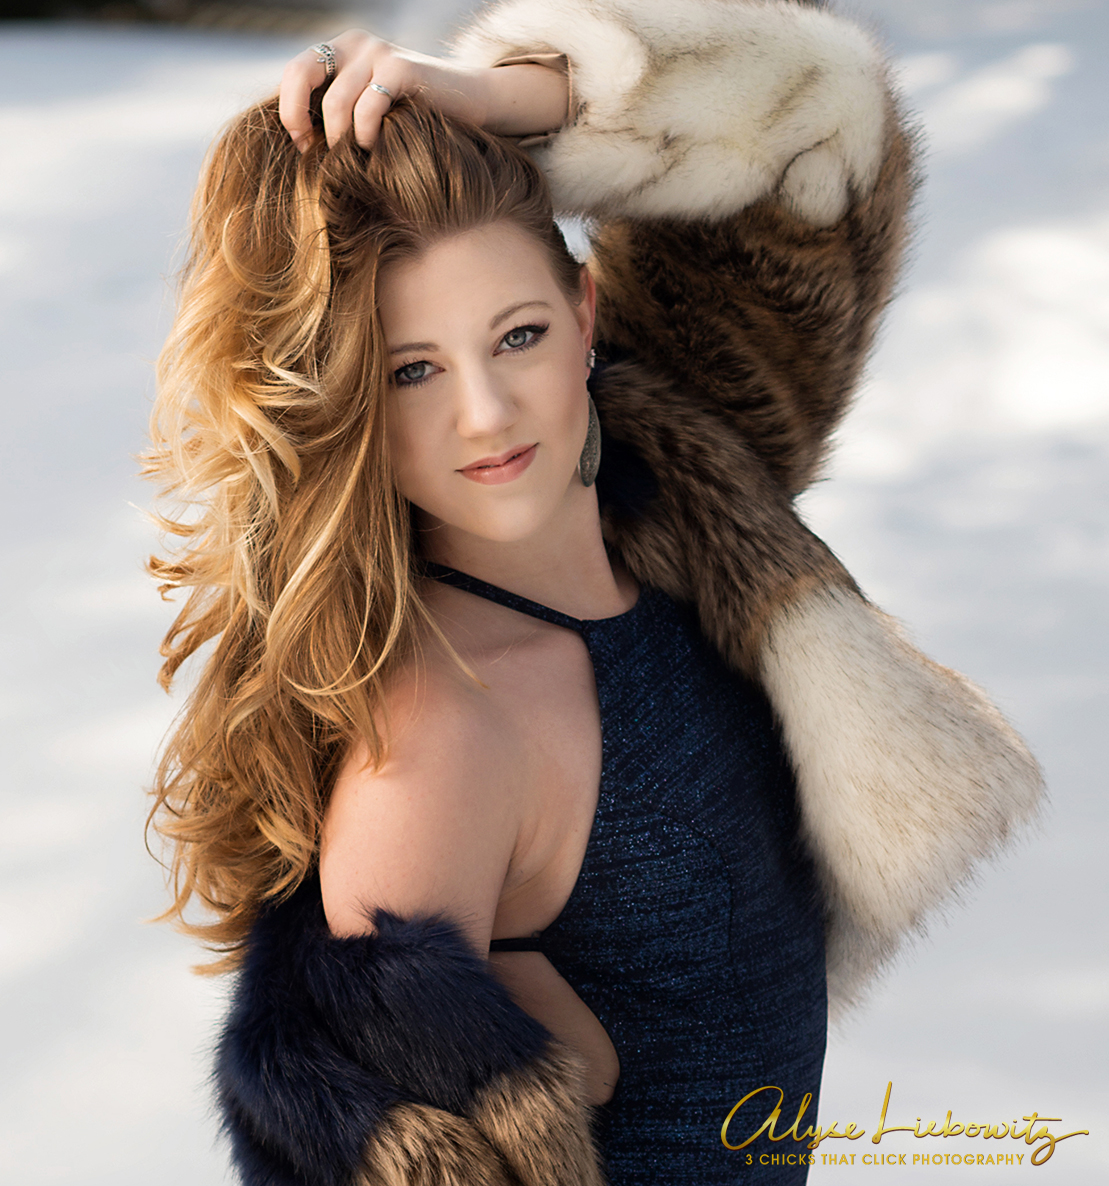 Jolie - Winter Wonderland, photographed by 3 Chicks That Click Photography